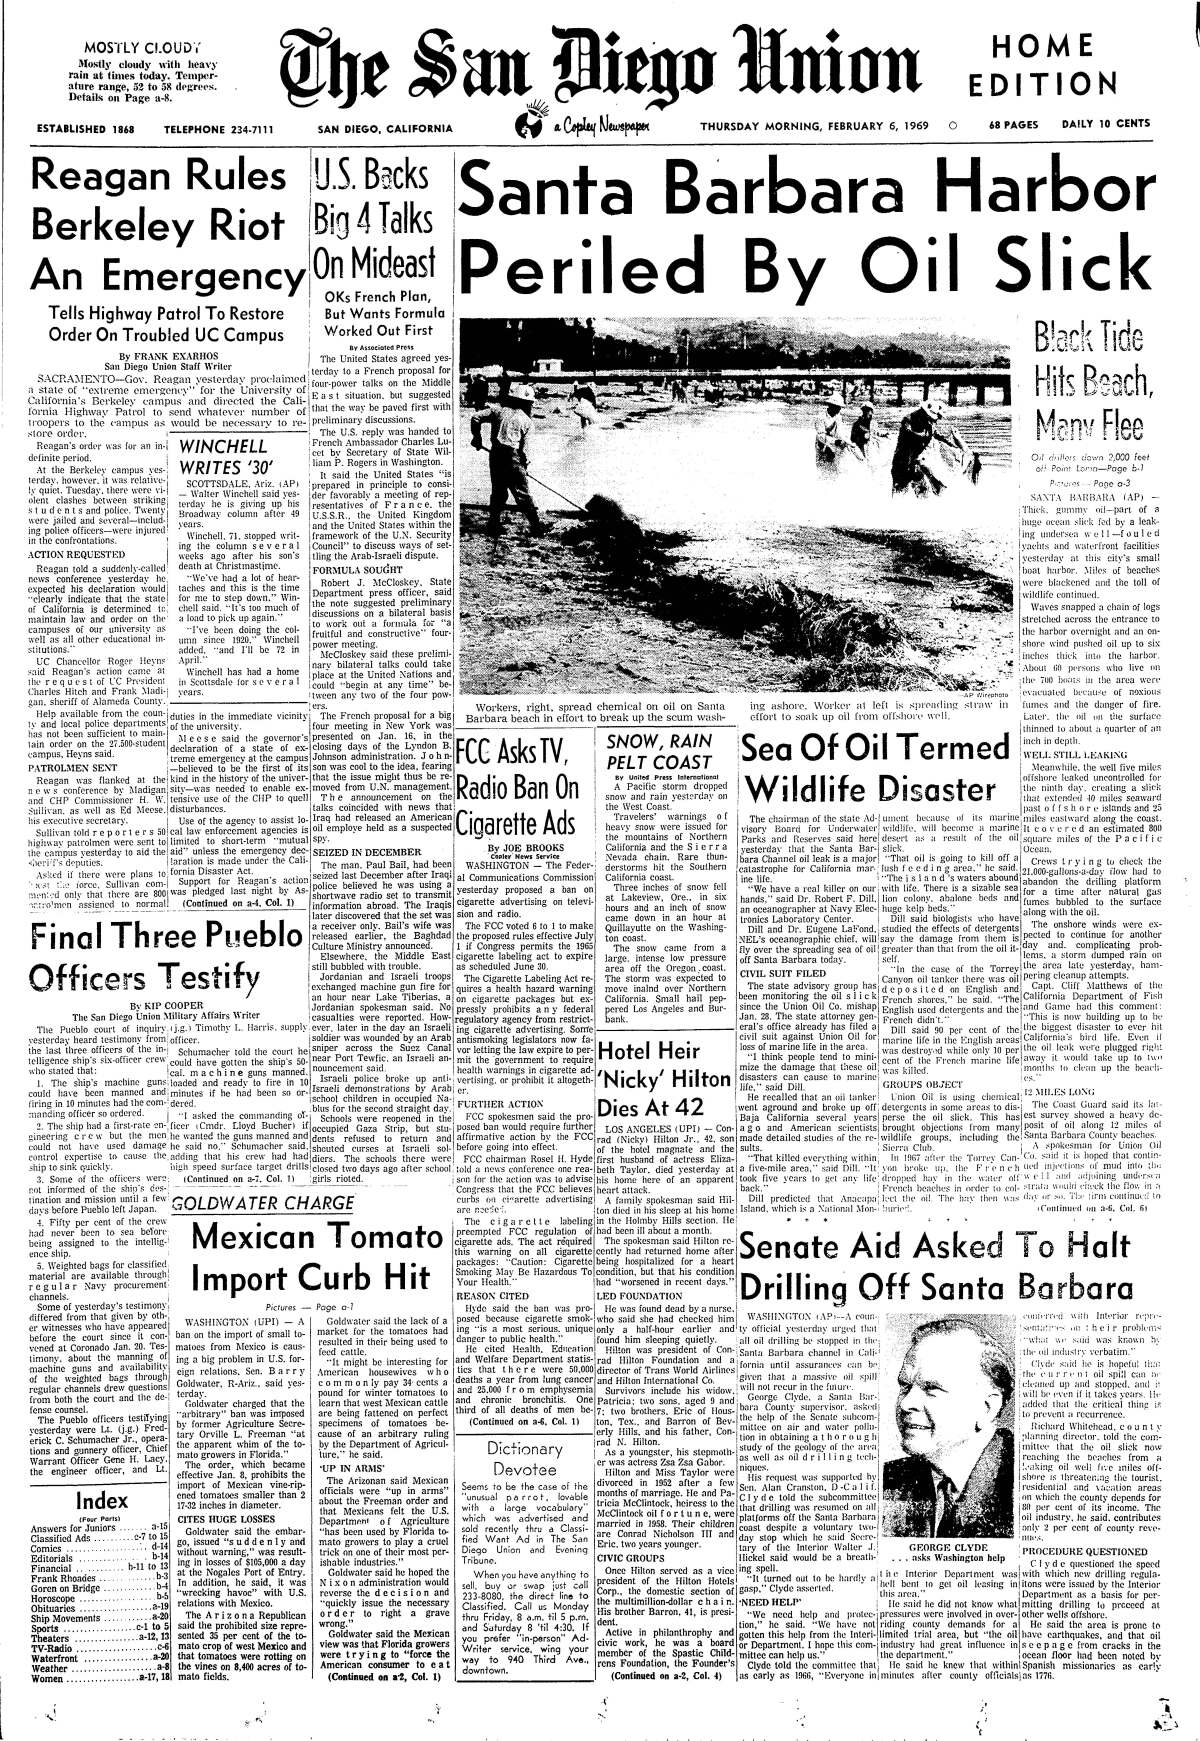 Front page of The San Diego Union, Feb. 6, 1969 with news of the catastrophic Santa Barbara oil spill.